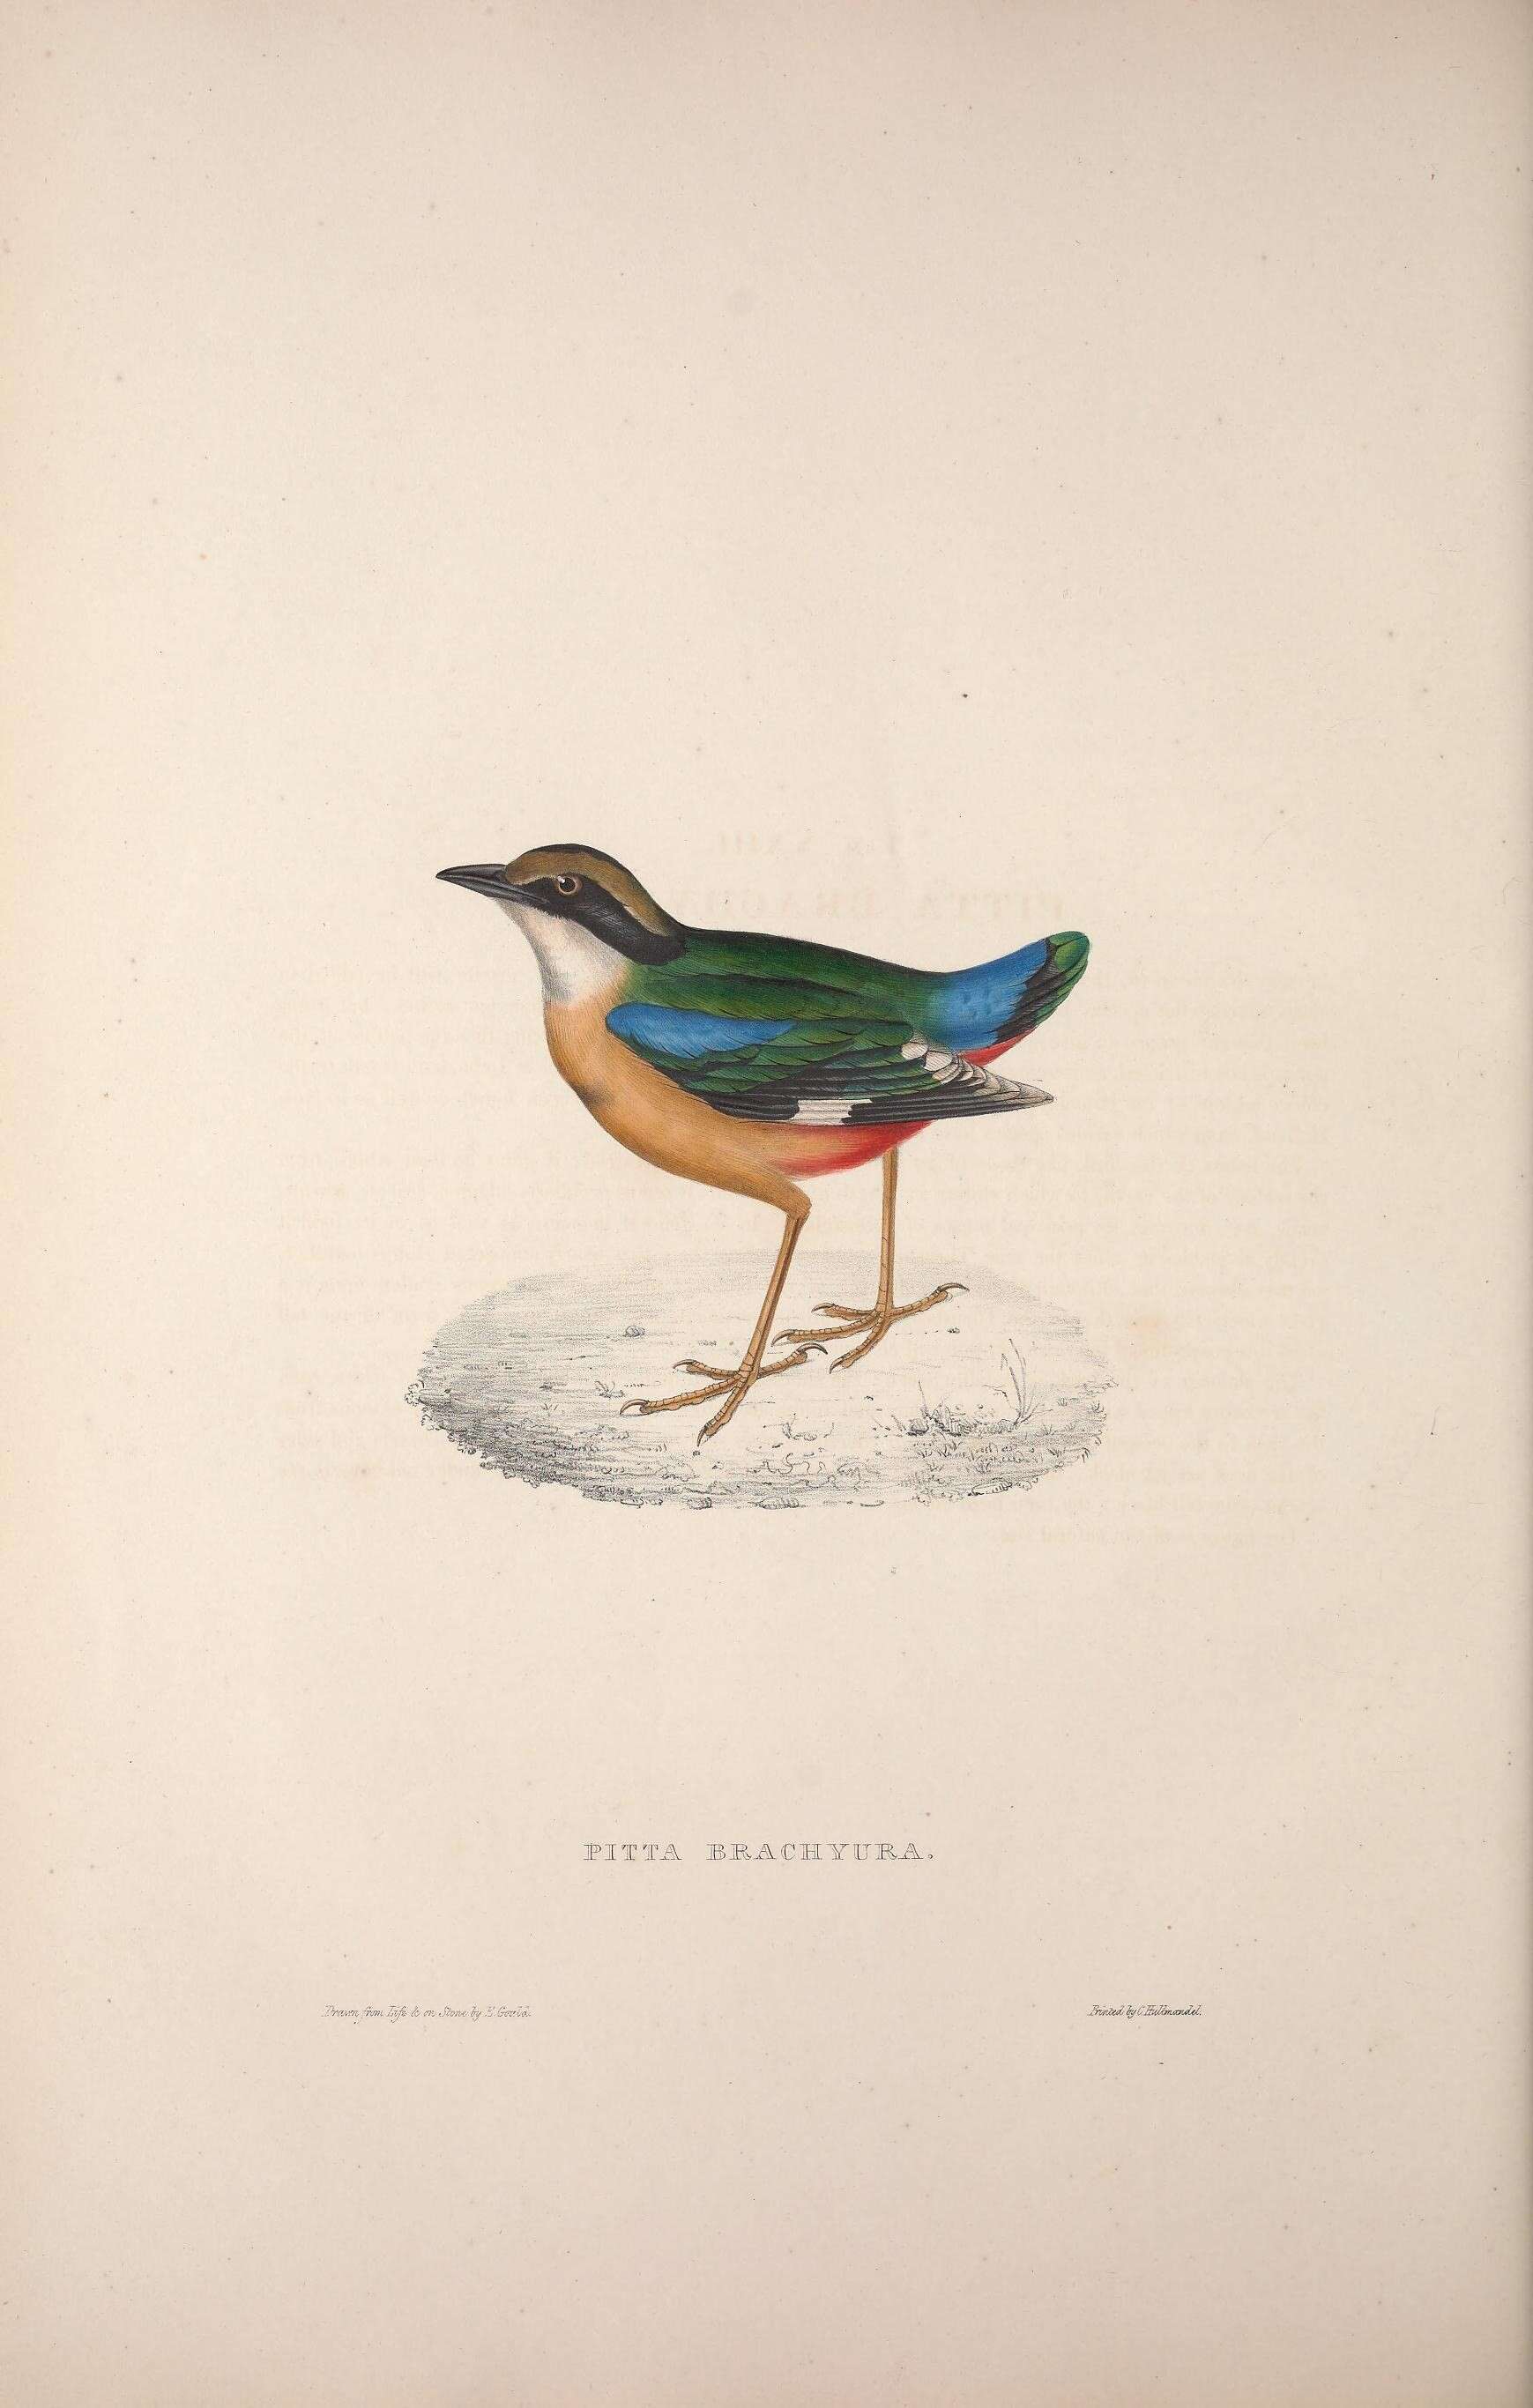 Image of Indian Pitta